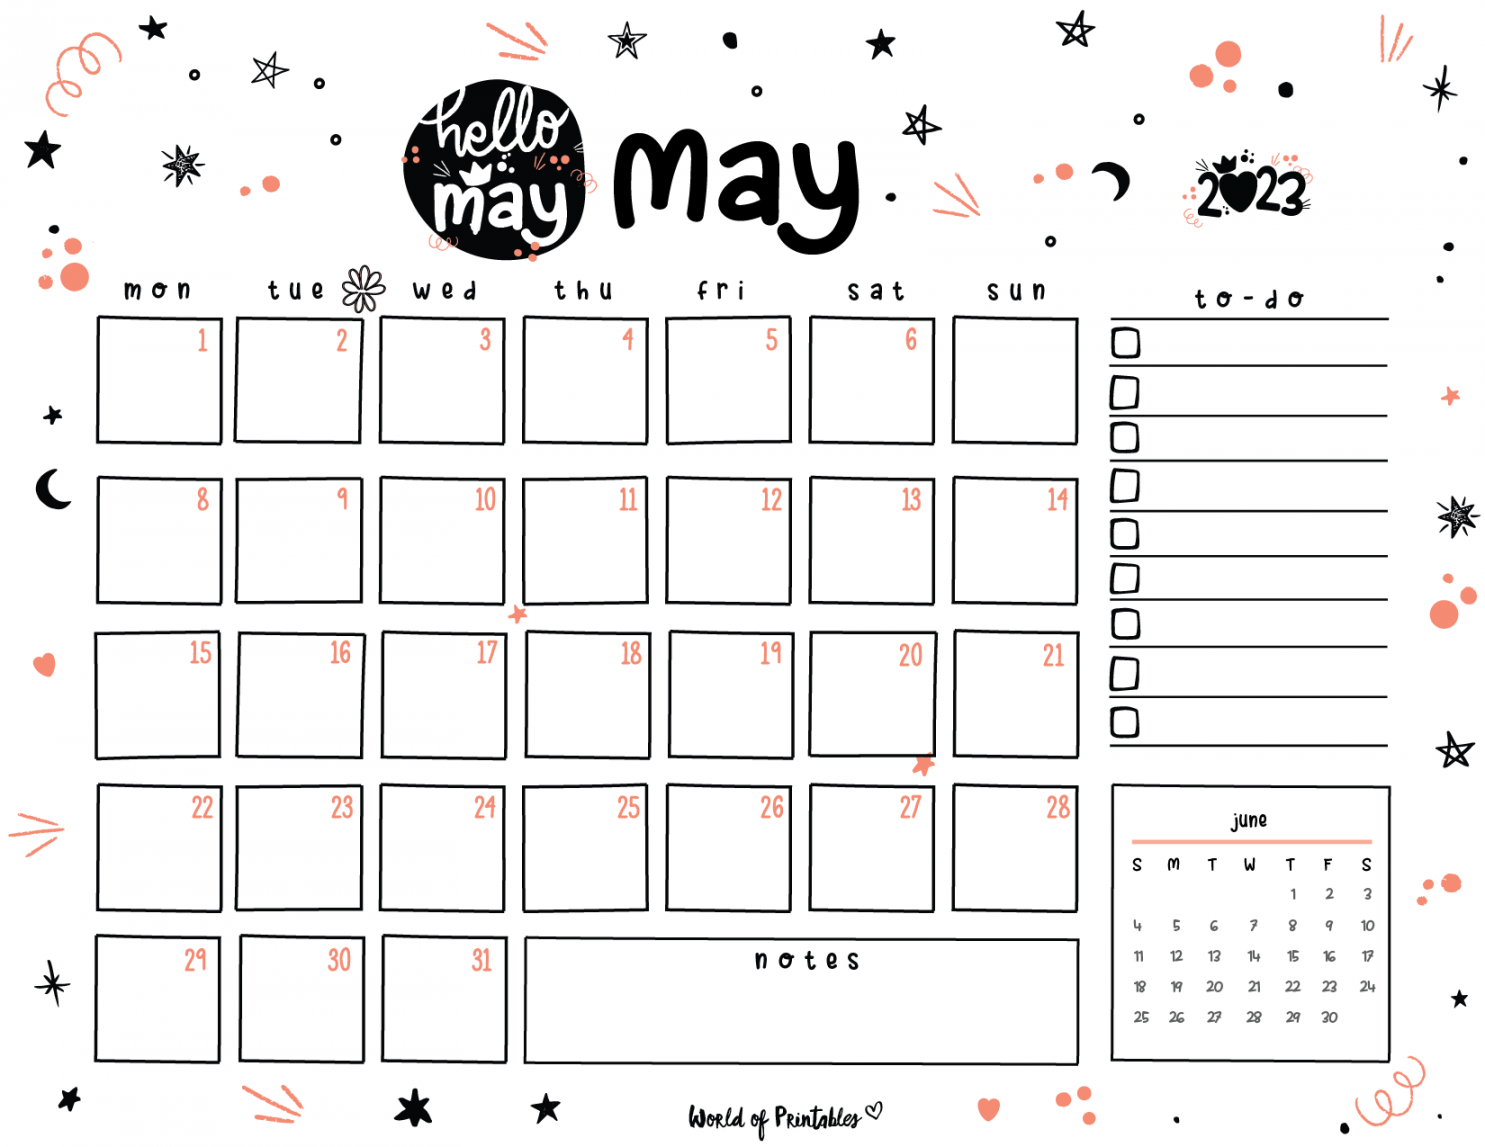 FREE Cute May  Calendar & Planners - World of Printables